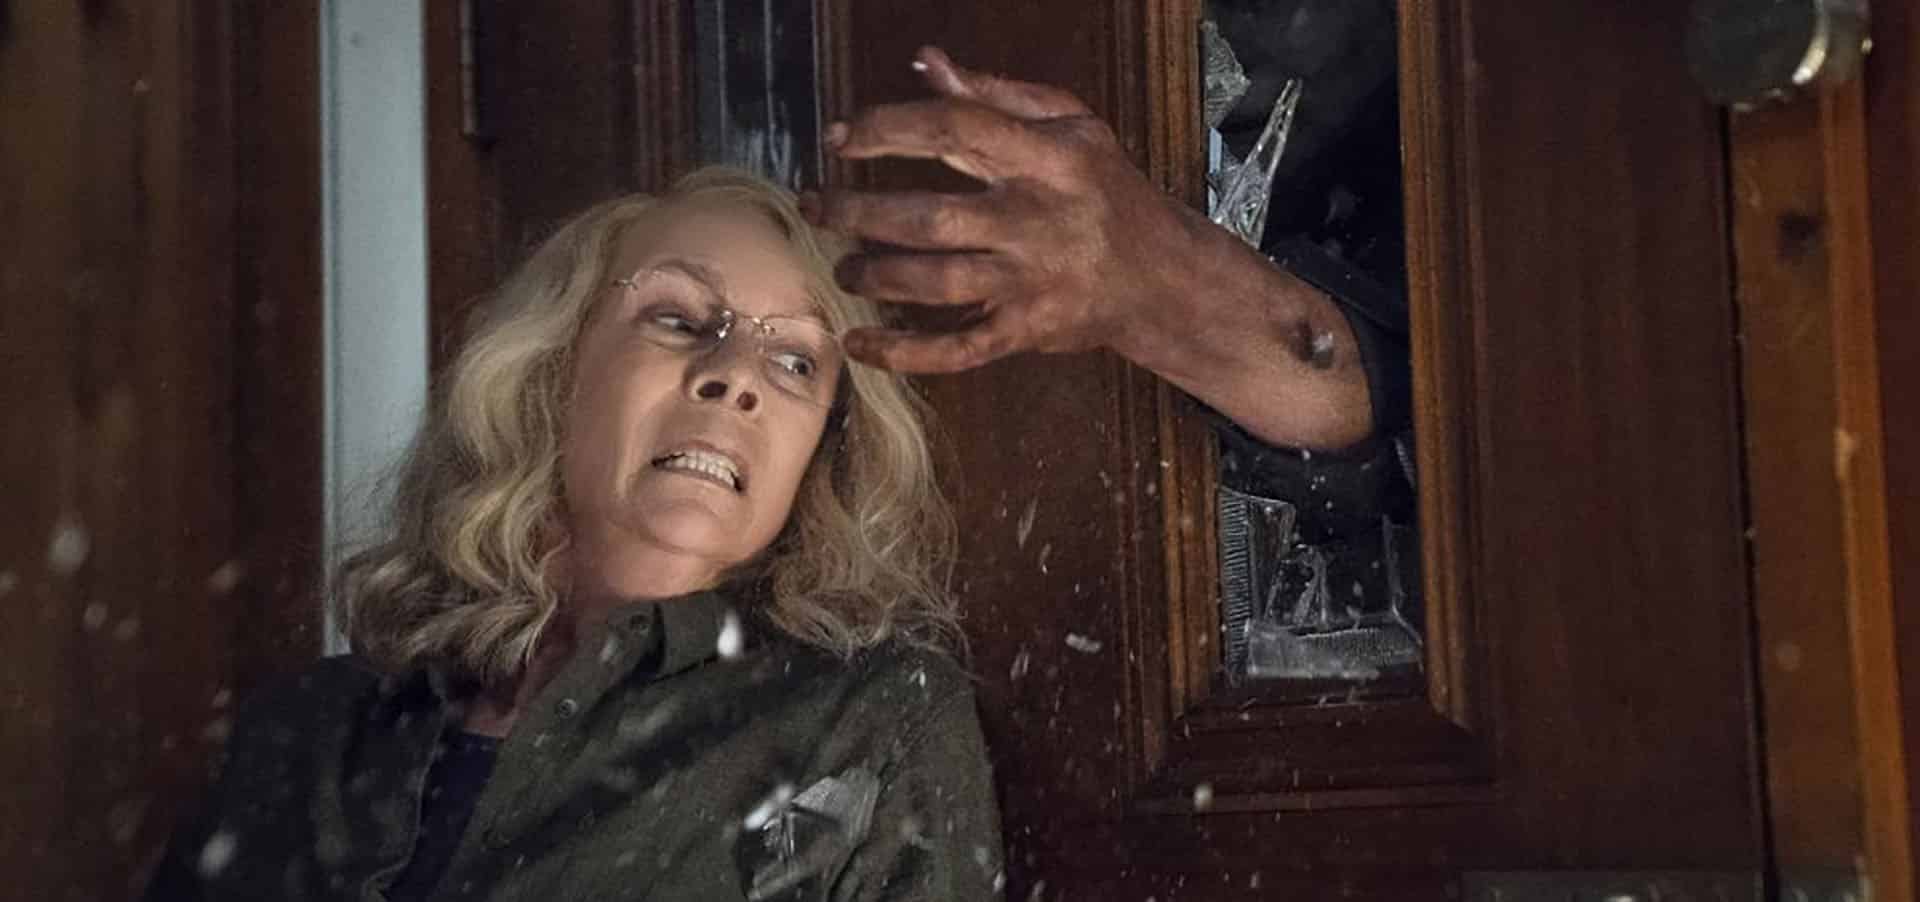 Box Office USA: Halloween vince anche il secondo week-end